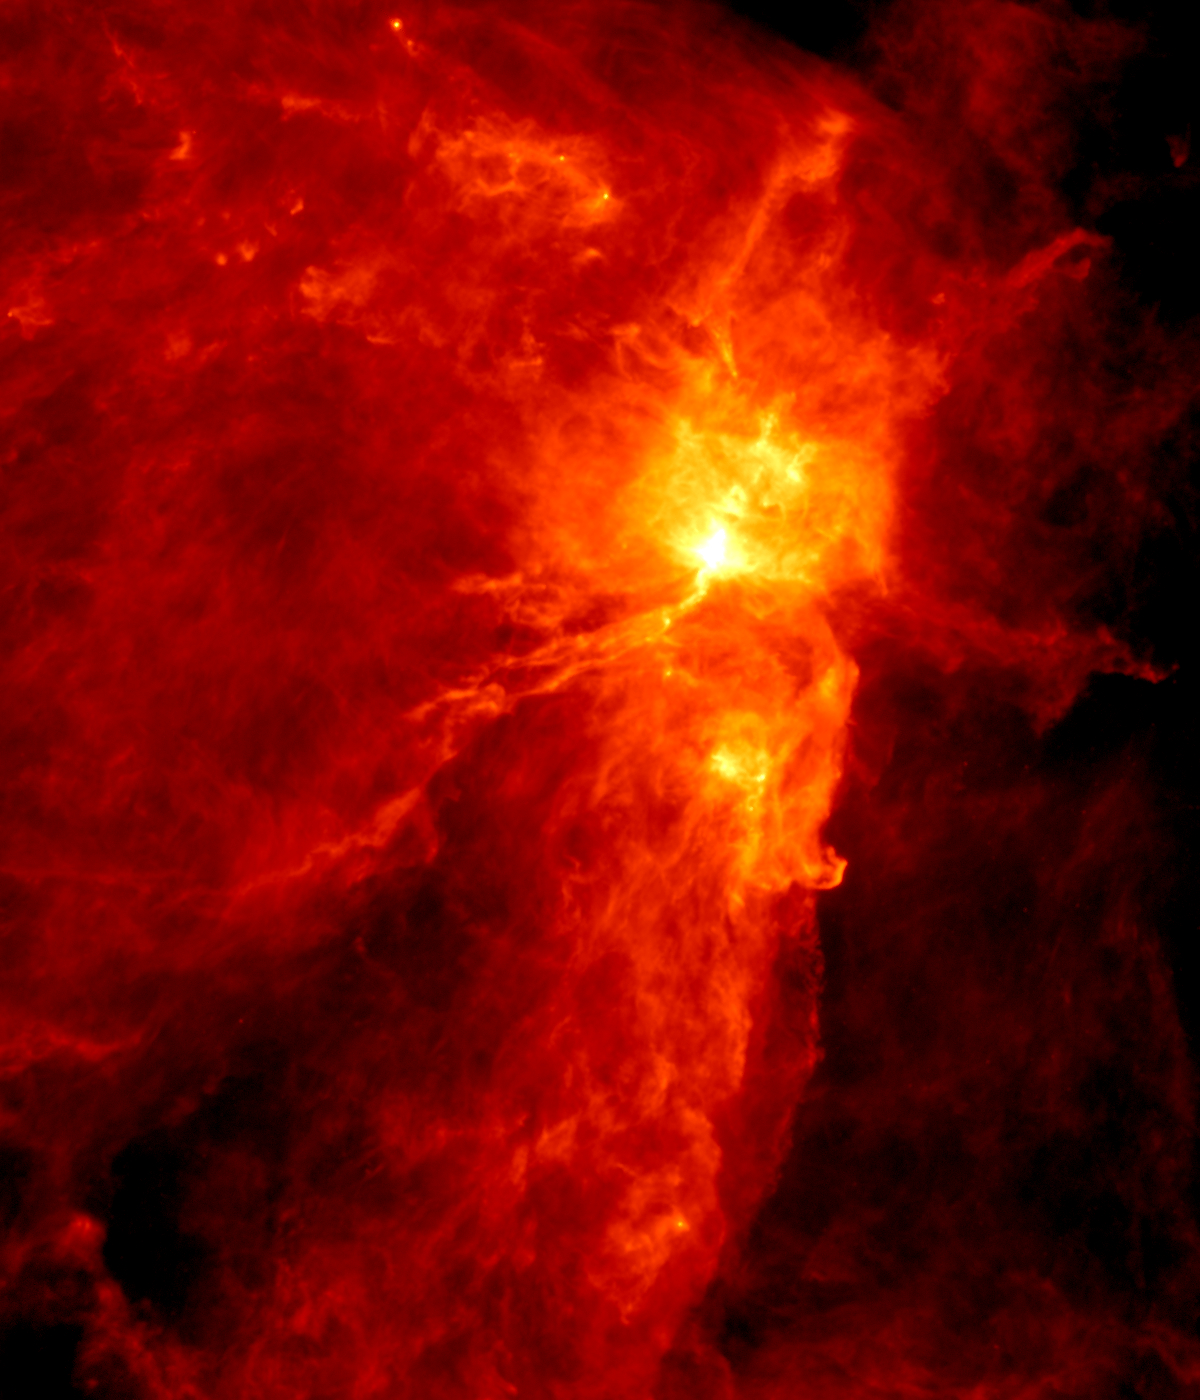 Orion B as seen in the far-infrared